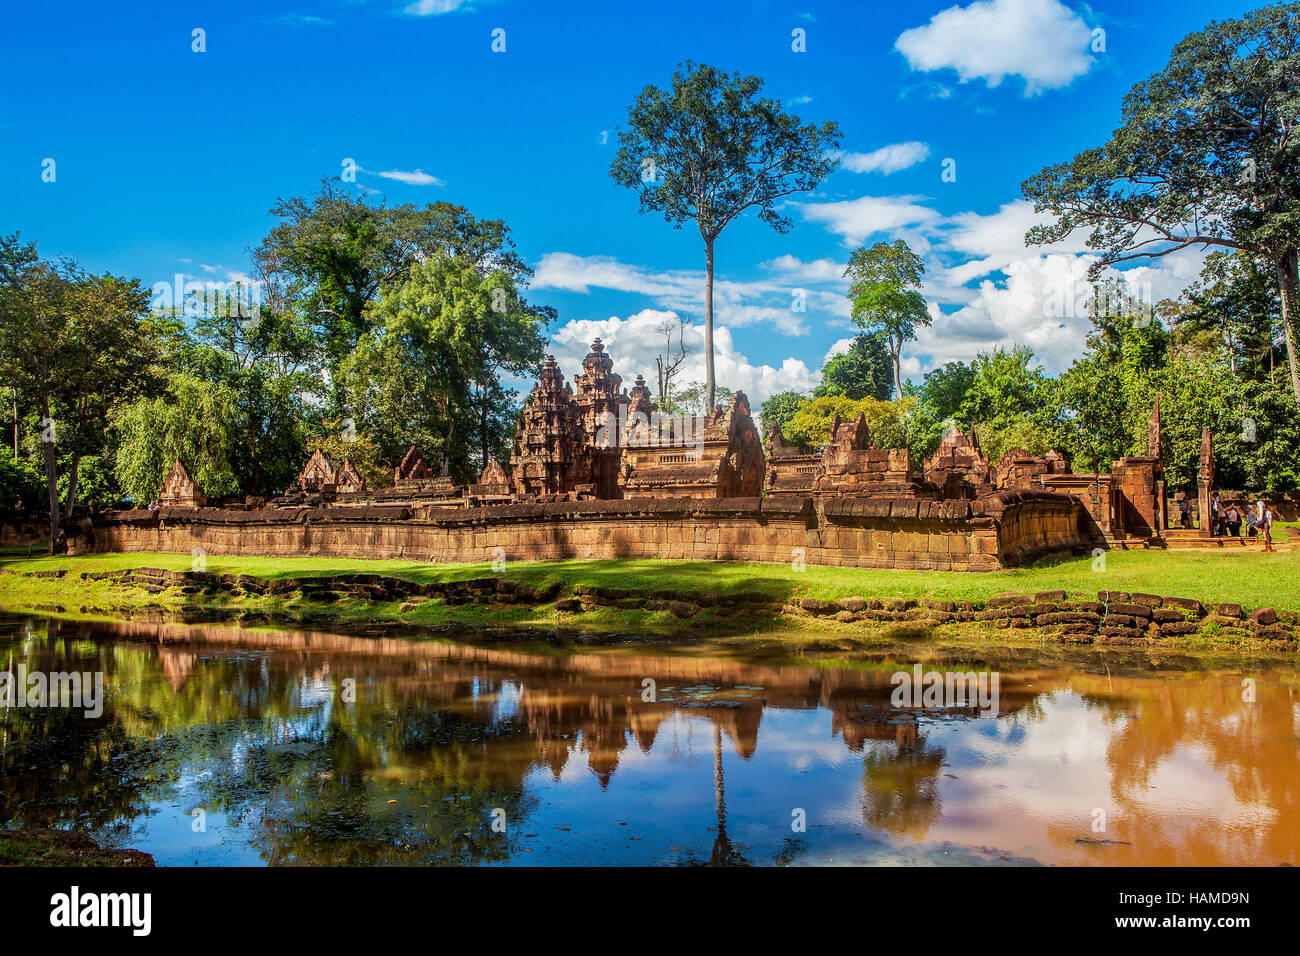 Exterior of the ancient red sandstone Hindu Khmer Buddhist temple at Banteay Srei, Kingdom of Cambodia. Stock Photo